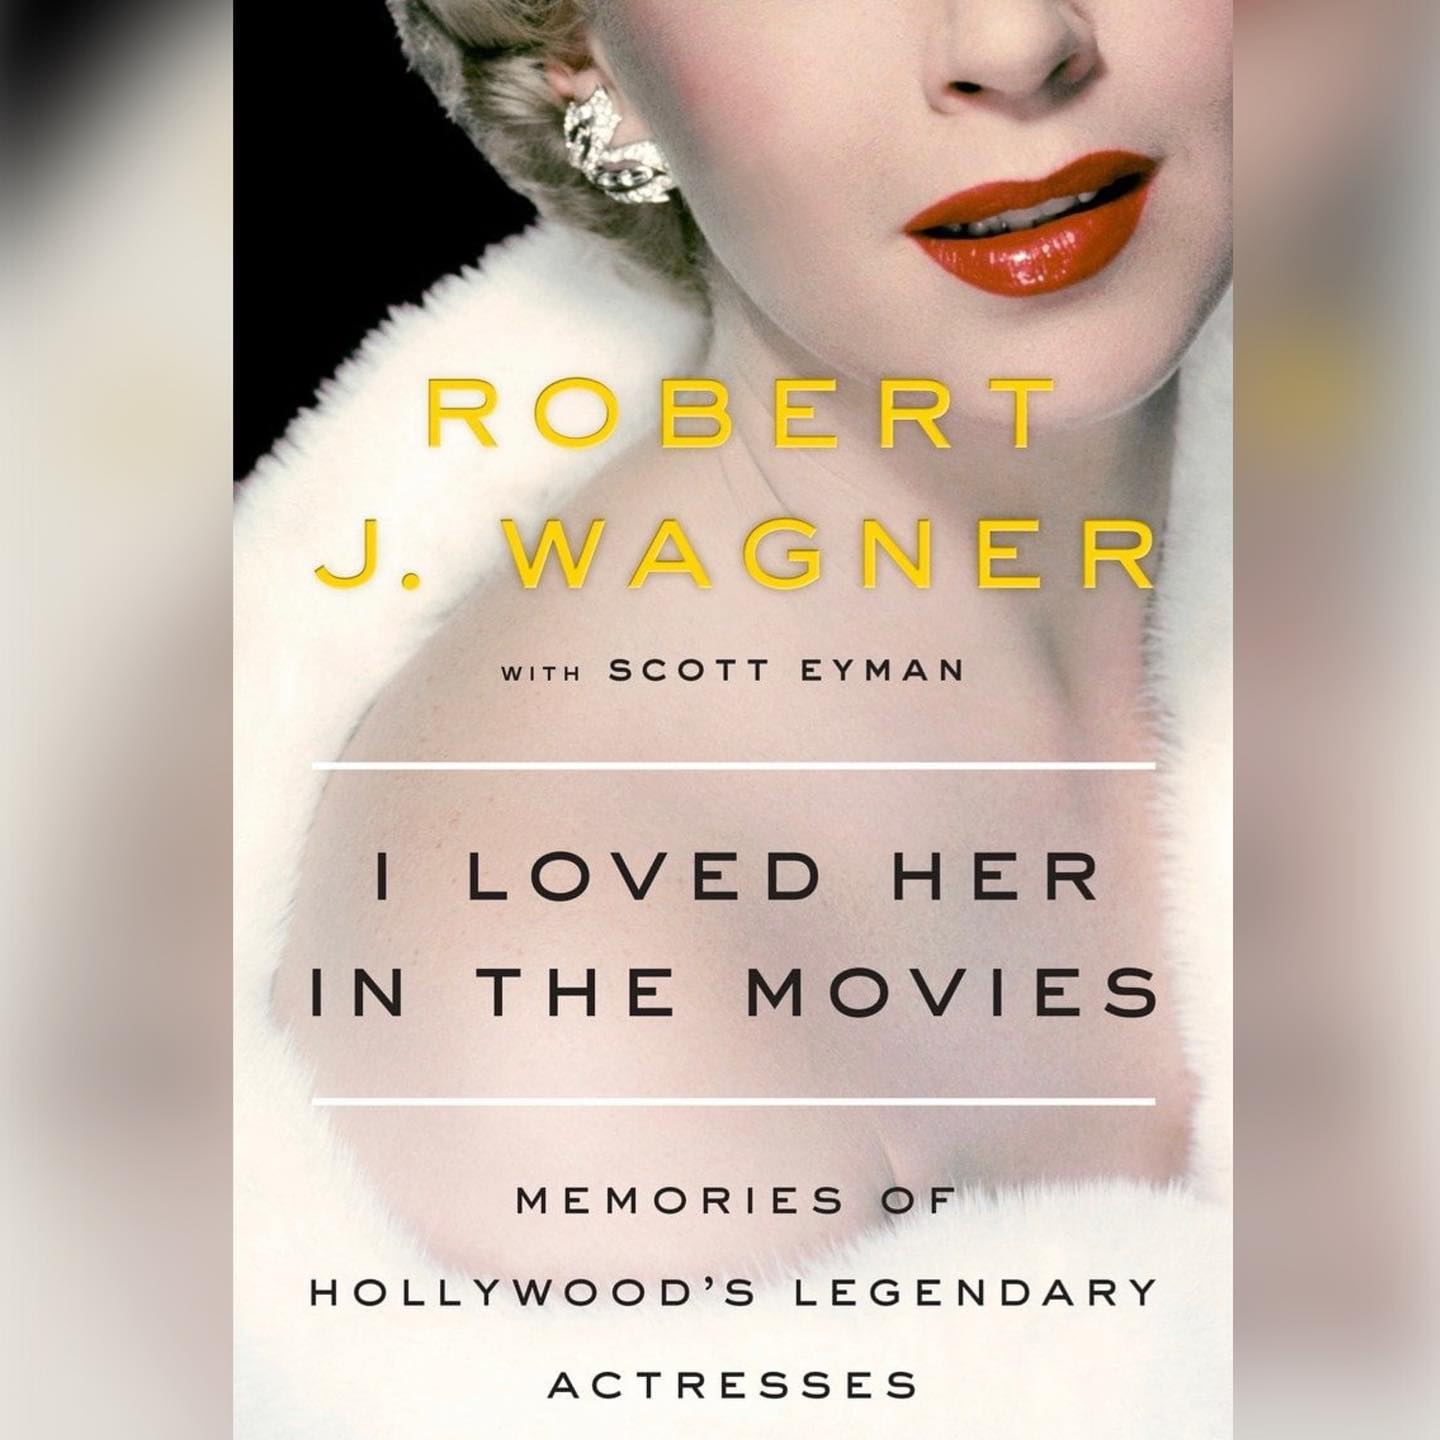 Six years ago on November 15, 2016 my 3rd book “I Loved Her In The Movies” Memories of Hollywood’s Legendary Actresses, written with my good friend Scott Eyman, was published.  Great trip down memory lane remembering these and many more great actresses that I have had the honor of knowing and working with. I hope you enjoyed it as much as we did writing it. If you haven’t had the opportunity to read it, it is available on Amazon for purchase or download. Have a great day! 
.
.
.
#robertwagner #scotteyman #ilovedherinthemovies #goldenageofhollywood #hollywood #moviestars #tvstars #legendaryactresses #harttohart #NCIS #ittakesathief